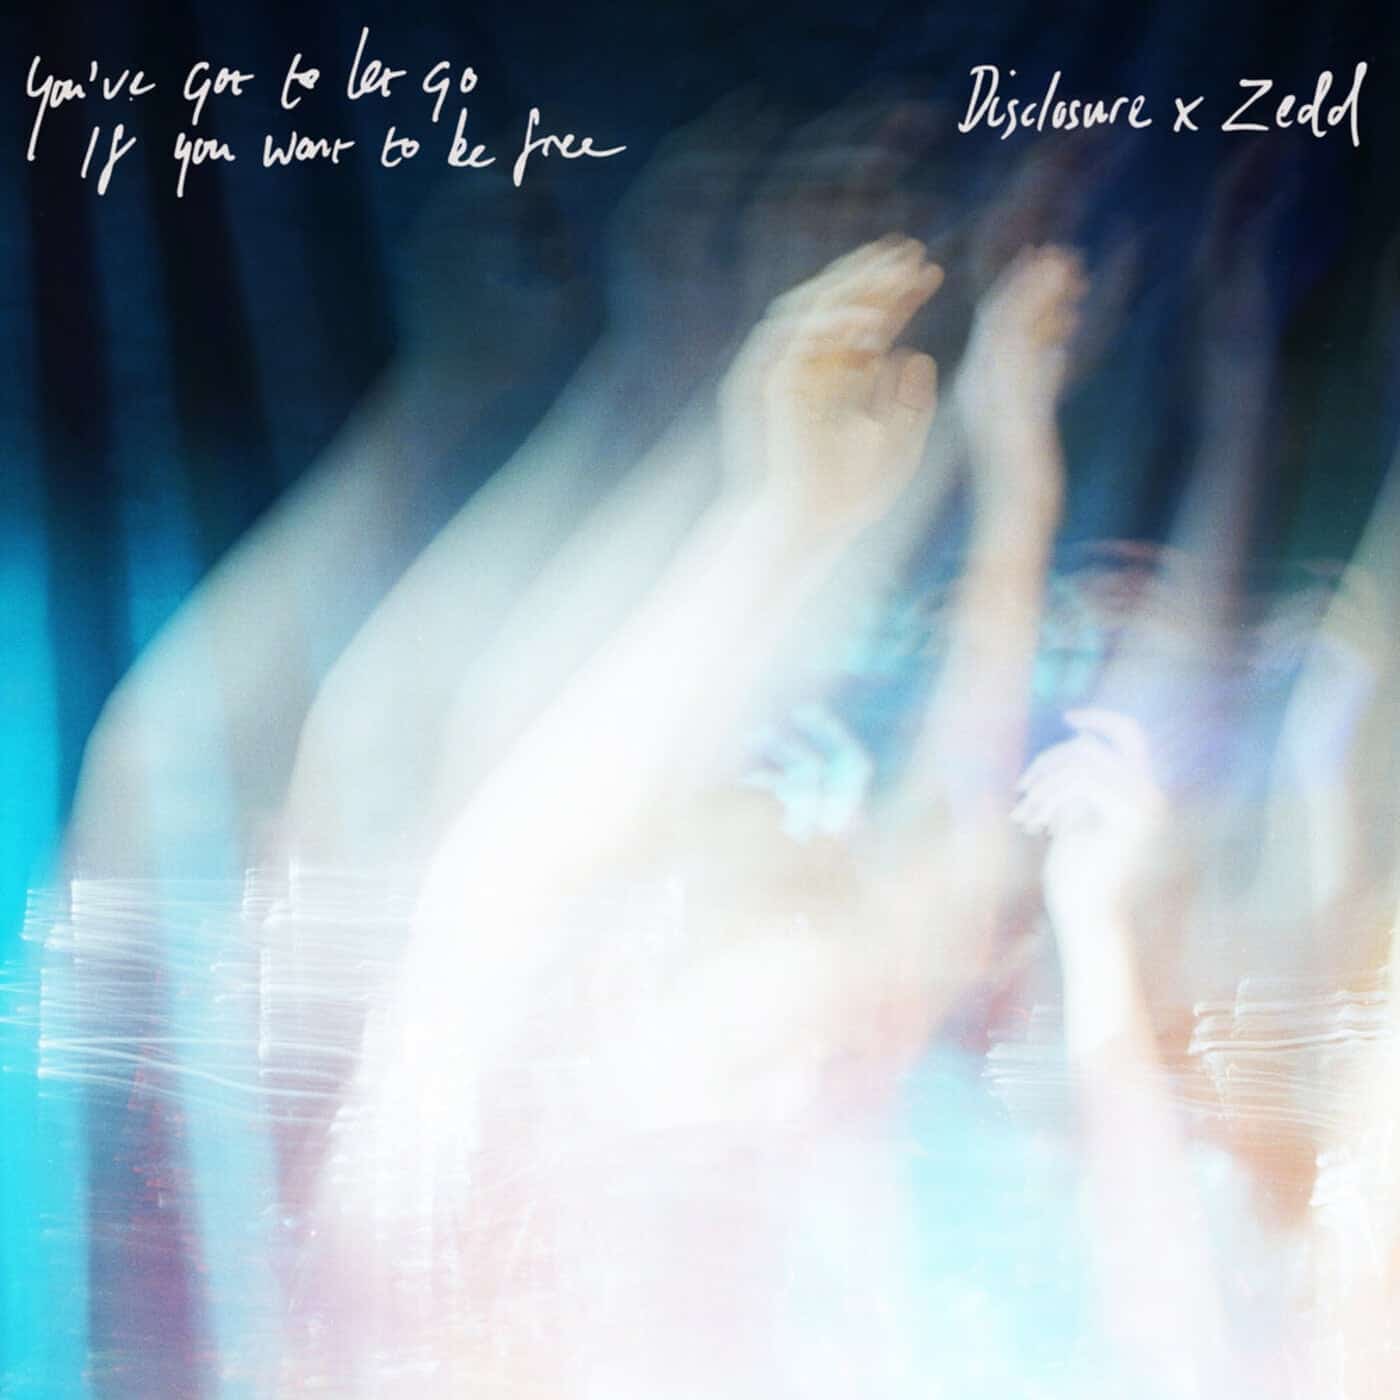 image cover: Zedd, Disclosure - You've Got To Let Go If You Want To Be Free / APO001